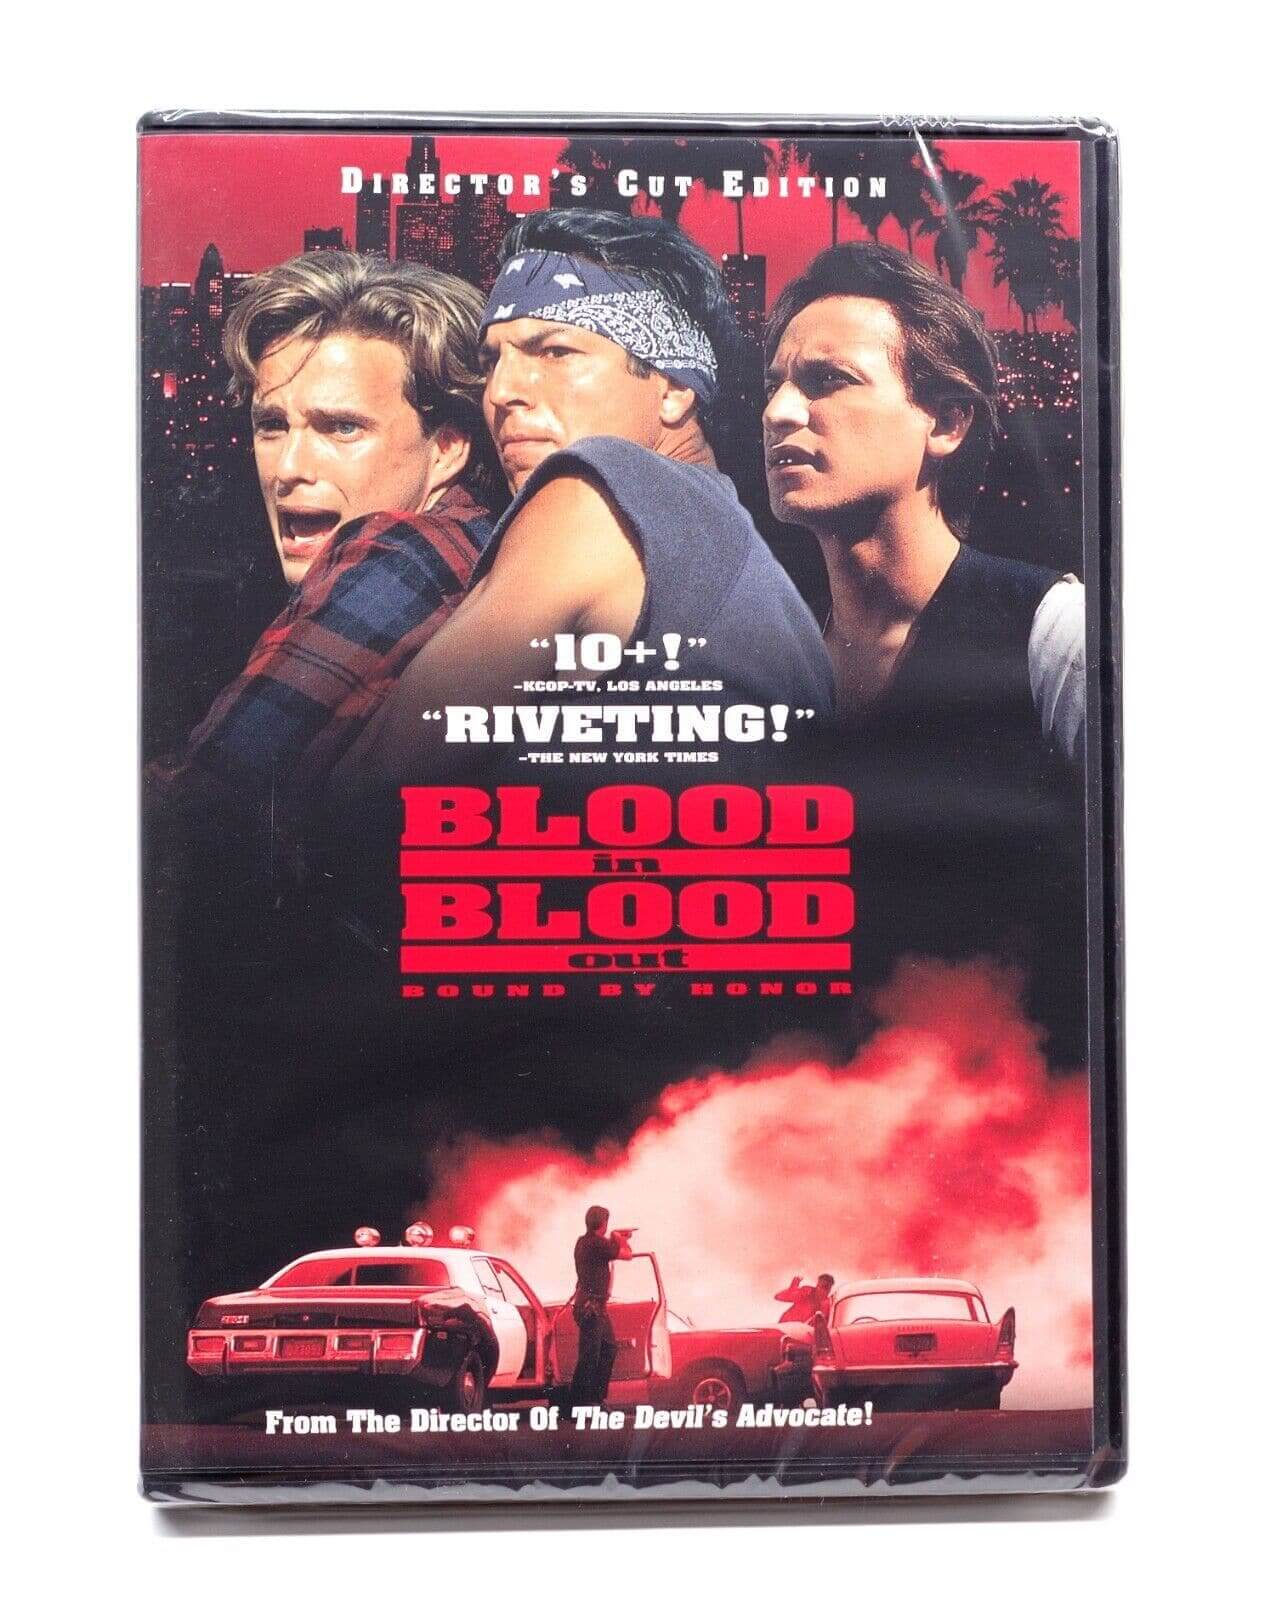 damla olcay recommends Full Movie Blood In Blood Out